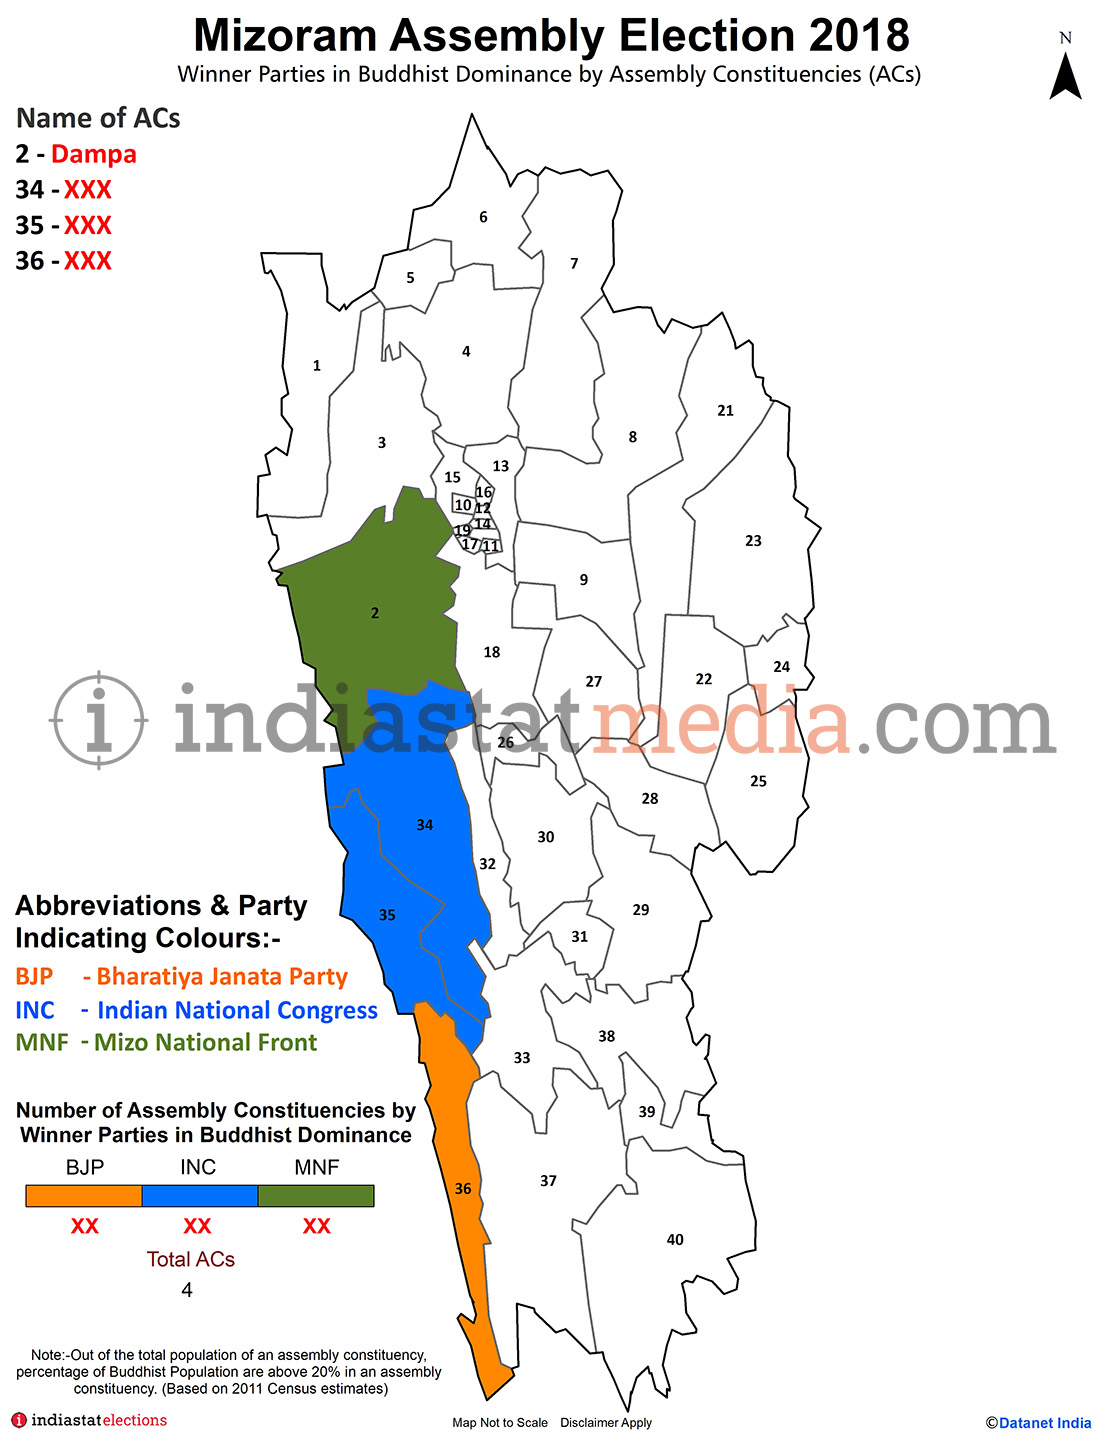 Winner Parties in Buddhist Dominance Constituencies in Mizoram Assembly Election (2018)